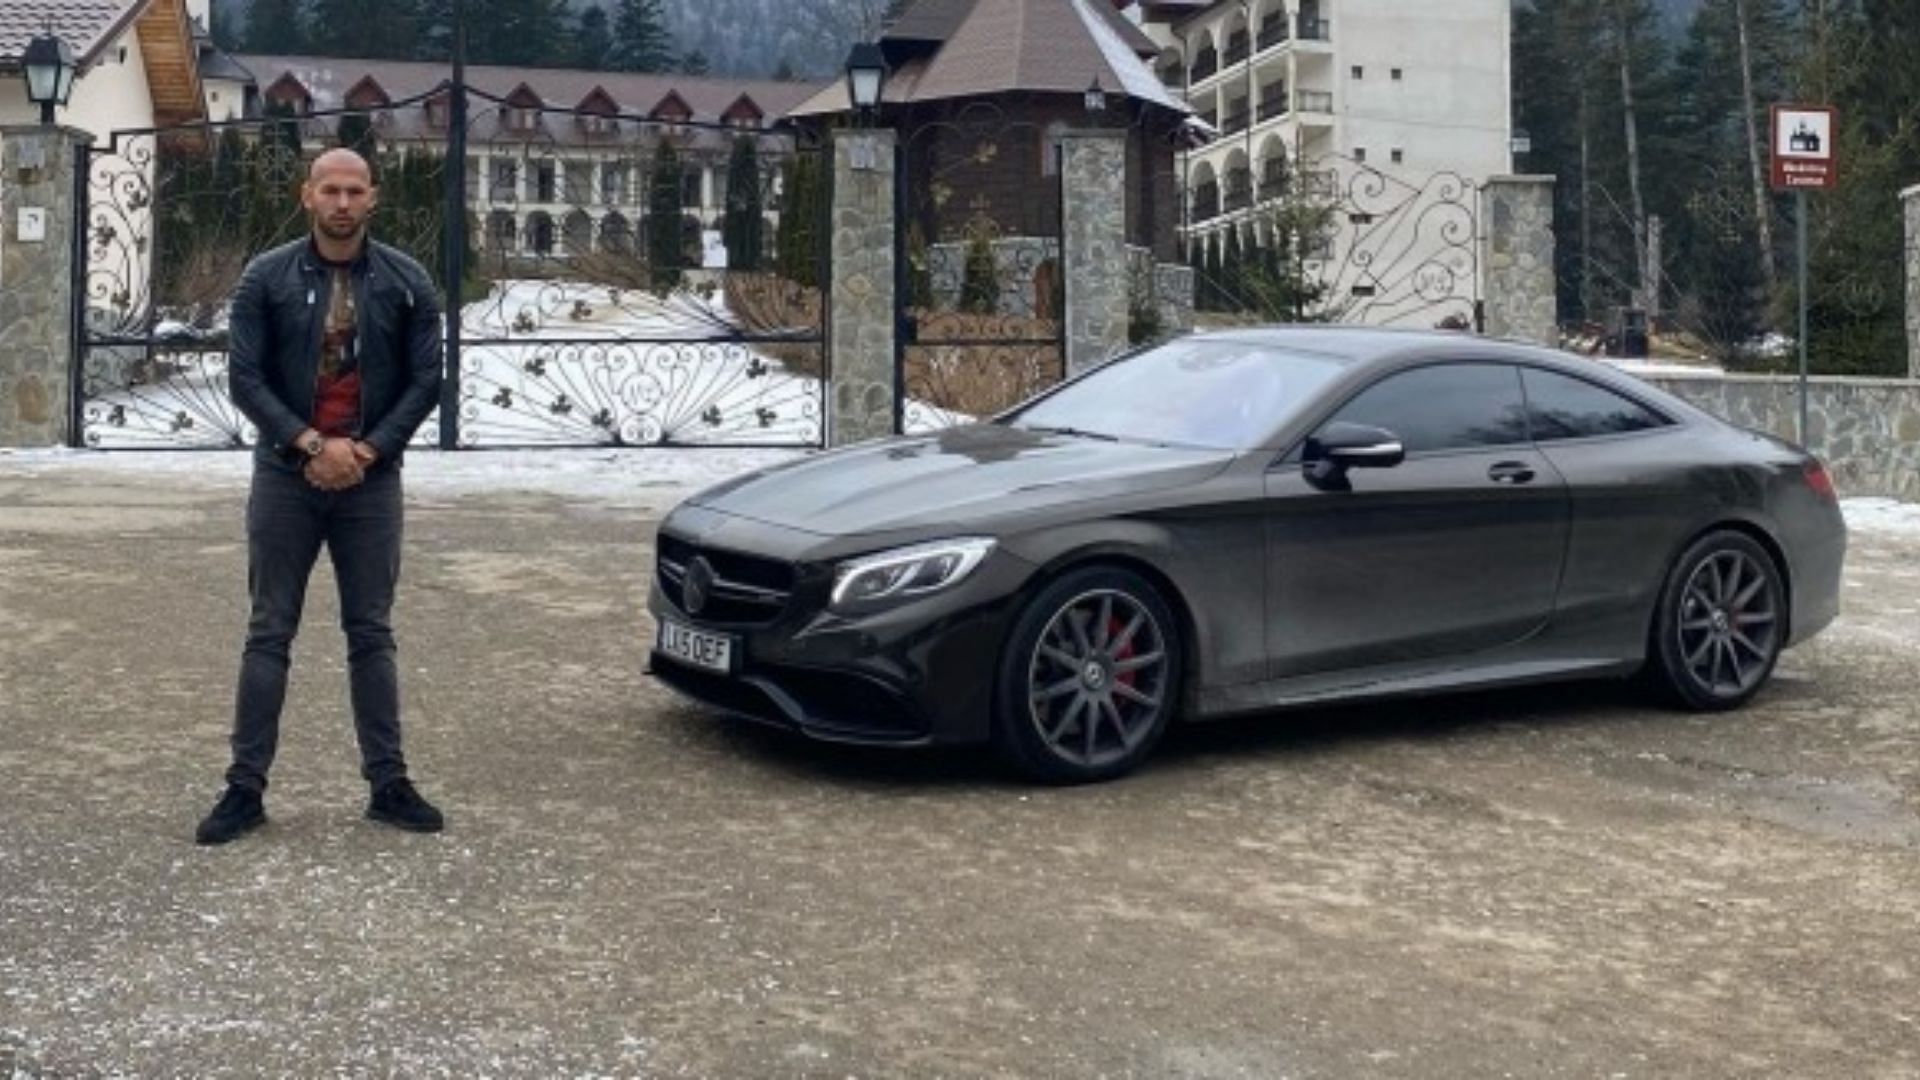 Tate's $140,000 Mercedes-AMG S63 Coupe (Image via Instagram)